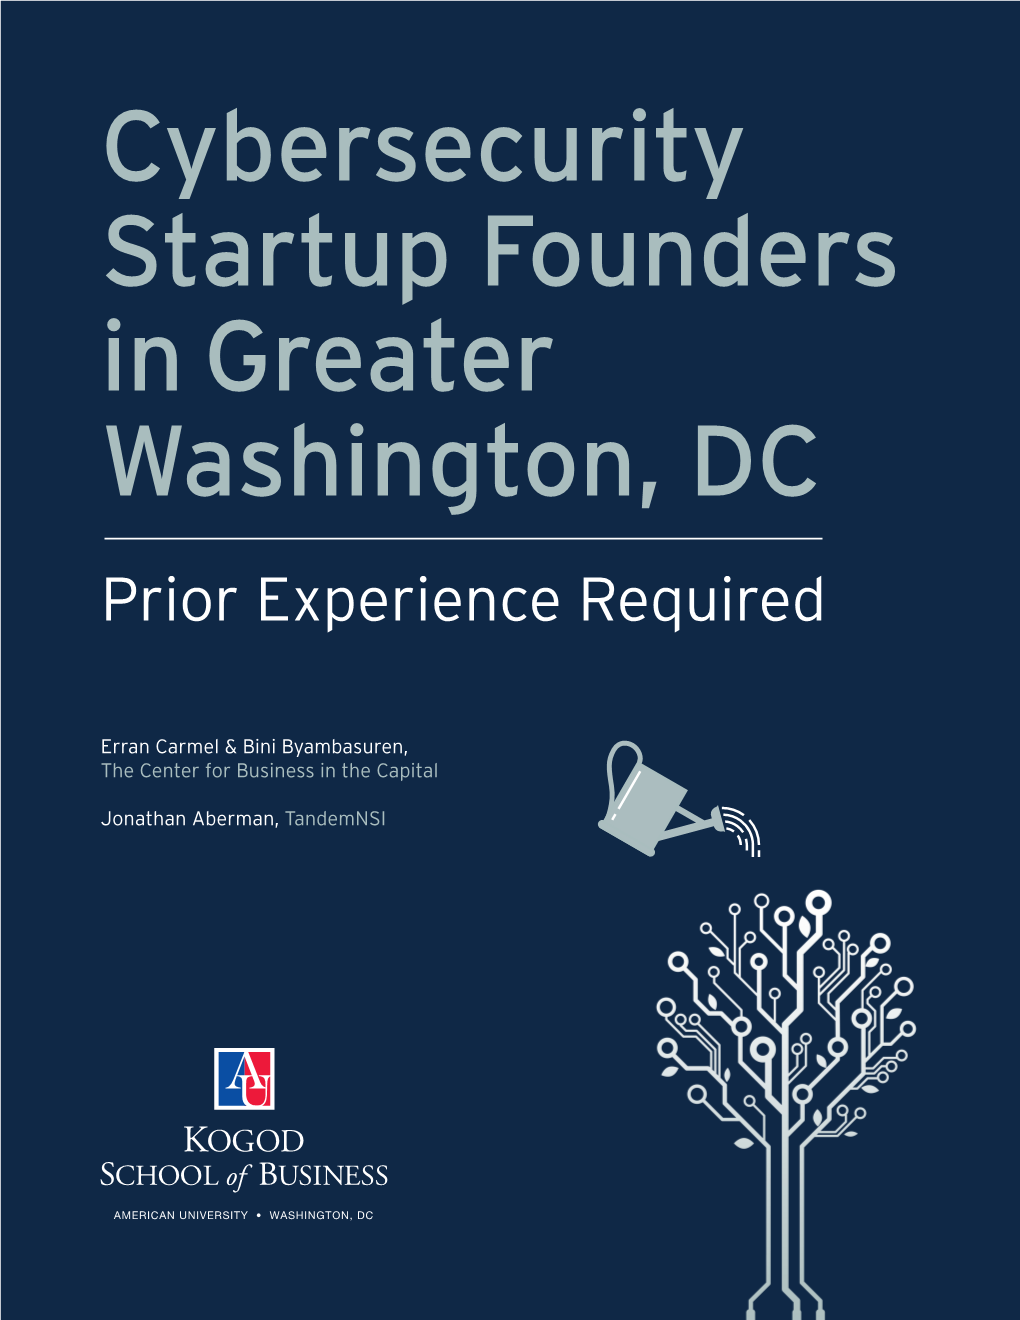 Cybersecurity Startup Founders in the Greater Washington Region: Prior Experience Required